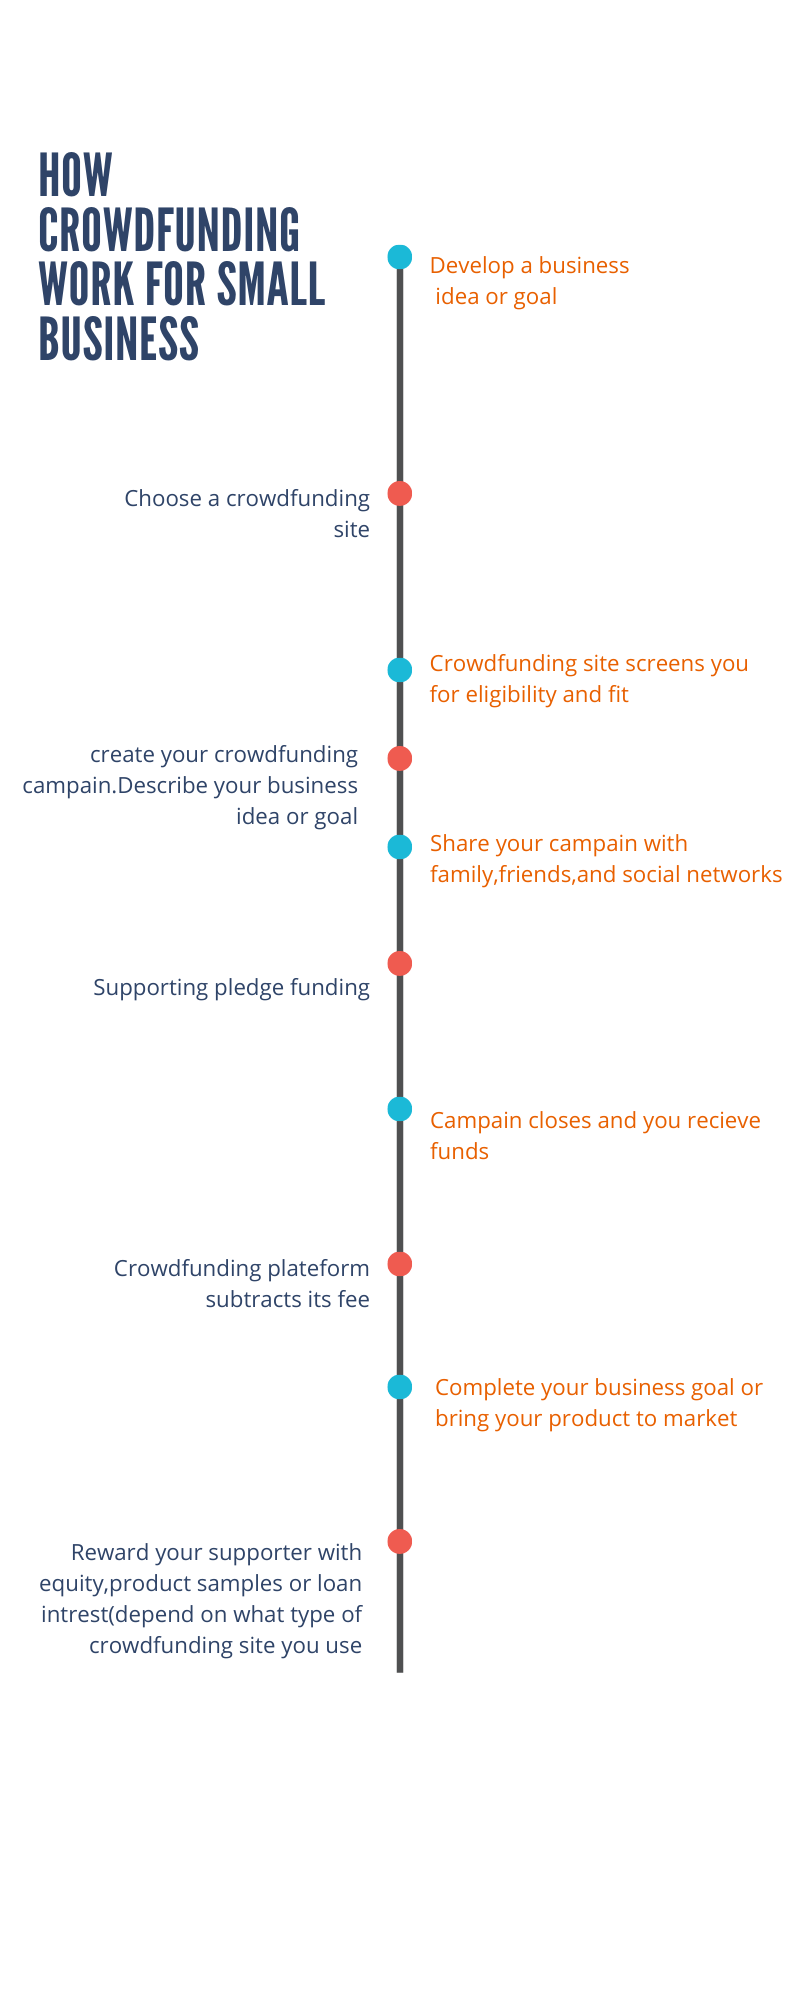 How crowdfunding work for small business